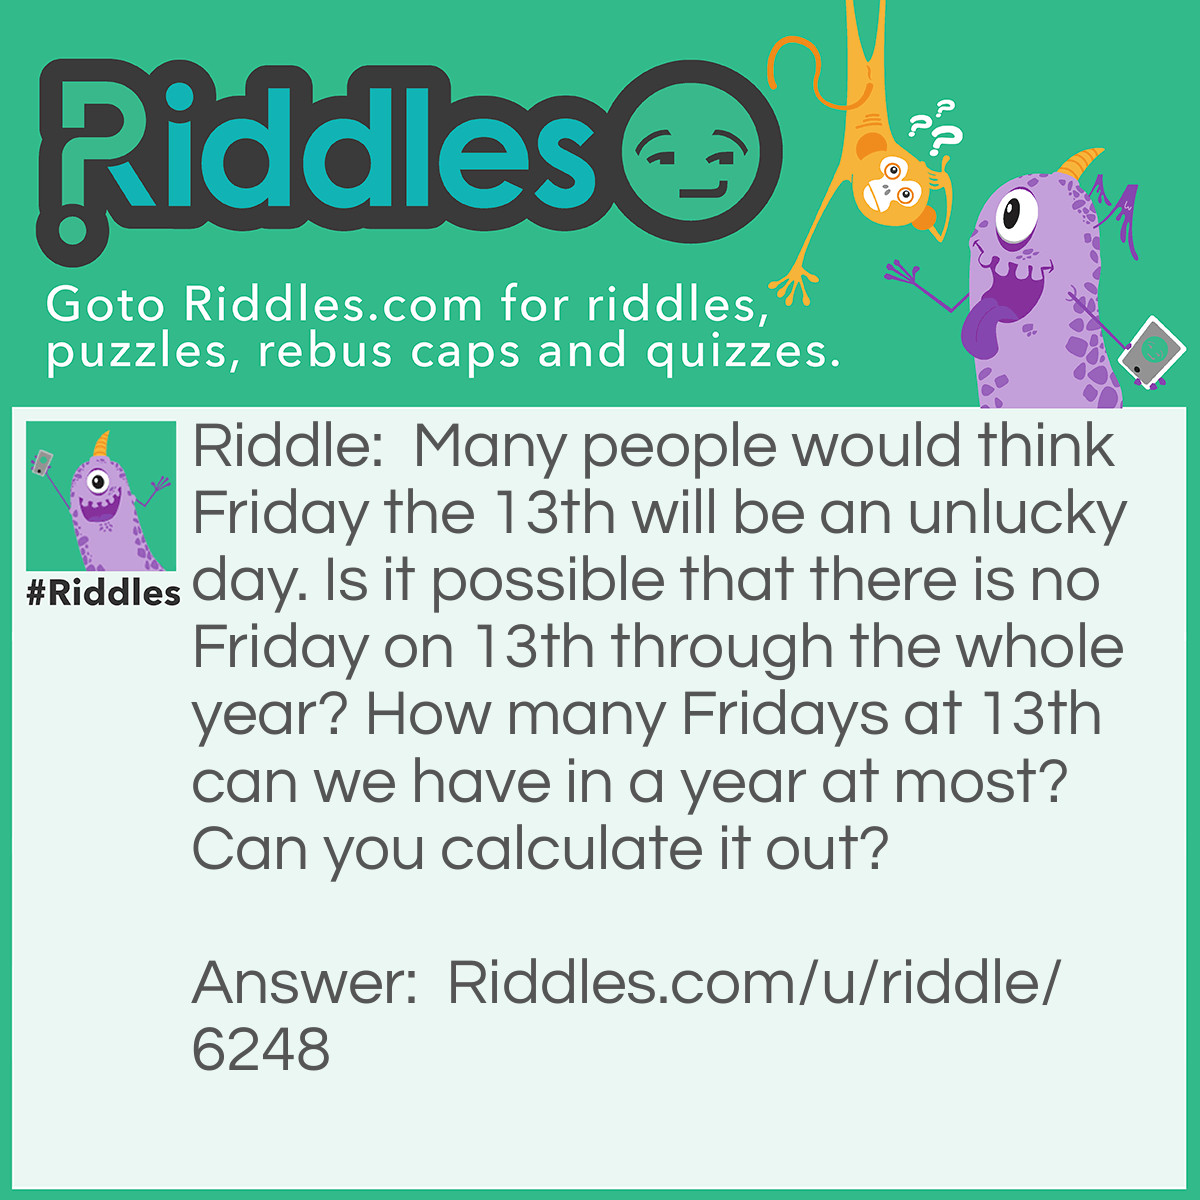 Riddle: Many people would think Friday the 13th will be an unlucky day. Is it possible that there is no Friday on 13th through the whole year? How many Fridays at 13th can we have in a year at most? Can you calculate it out? Answer: We can calculate out how many days there will be for the 13th on each month if we count from the beginning of the year (January 1). Then we divide total days by 7 to get the remainders. We also need to consider the leap year. Through the whole year we had all kinds of remainders, from 0 to 6. The minimum of occurence for all the unique remainders was 1. It means that we have at least one Friday on 13th. In a regular year, the best chance you can get 3 Fridays on 13th, which are in February, March and December because the remainders of these 3 months are 2. In a leap year, the best chance you also can get 3 Fridays on 13th, which are in January, April and July because the remainders of these 3 months are 6.